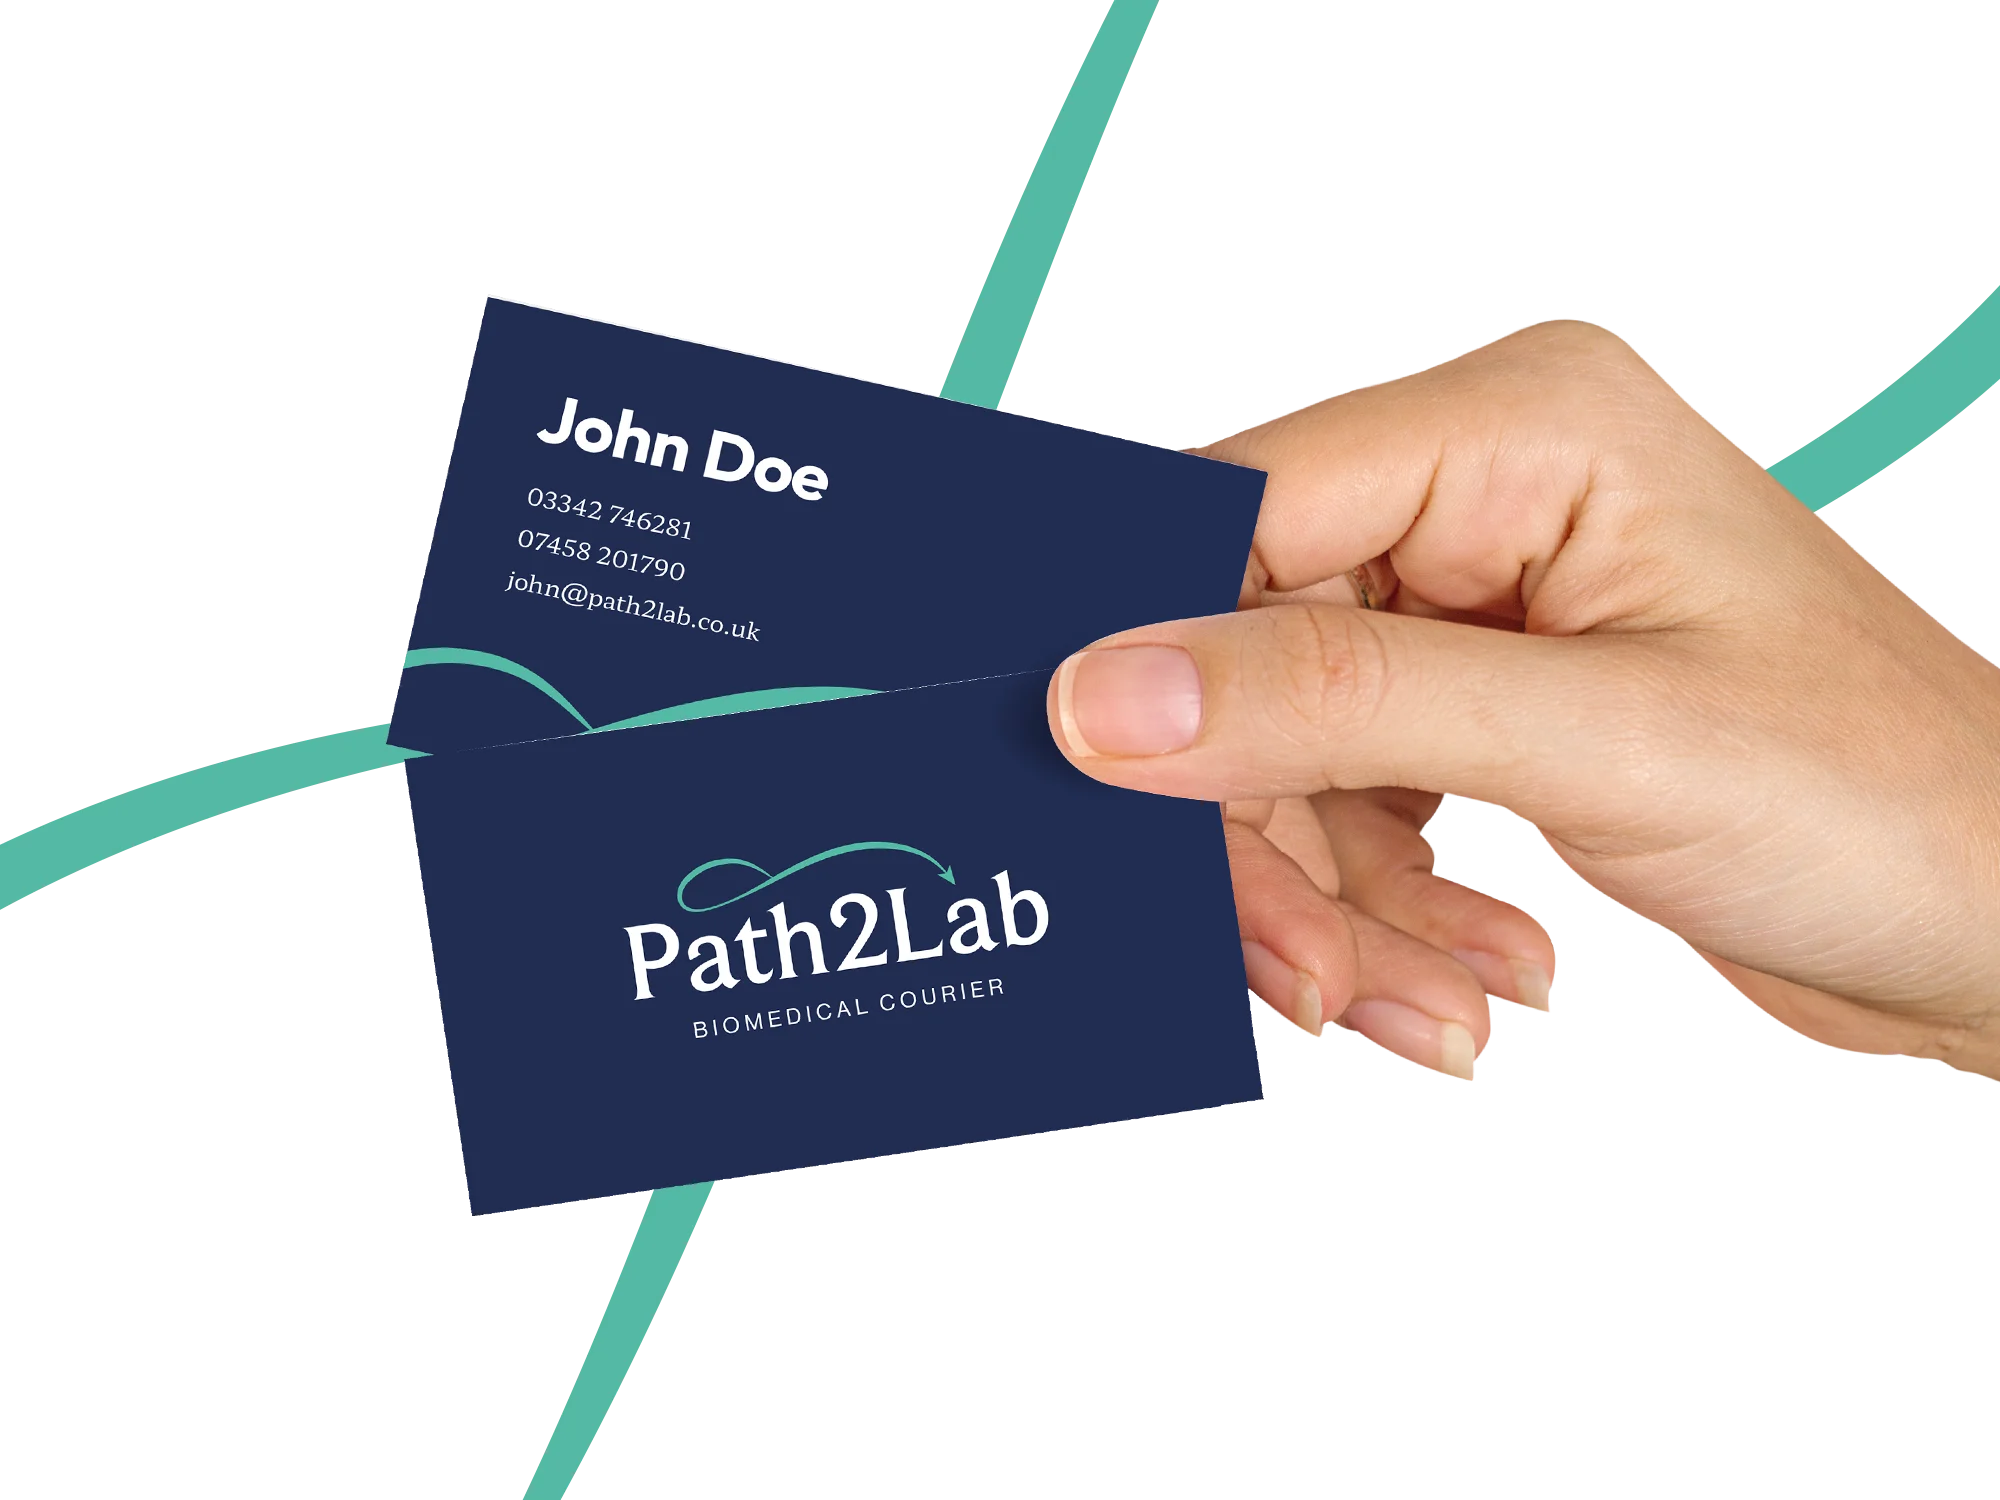 Path2Lab Branded Business Cards In Hands